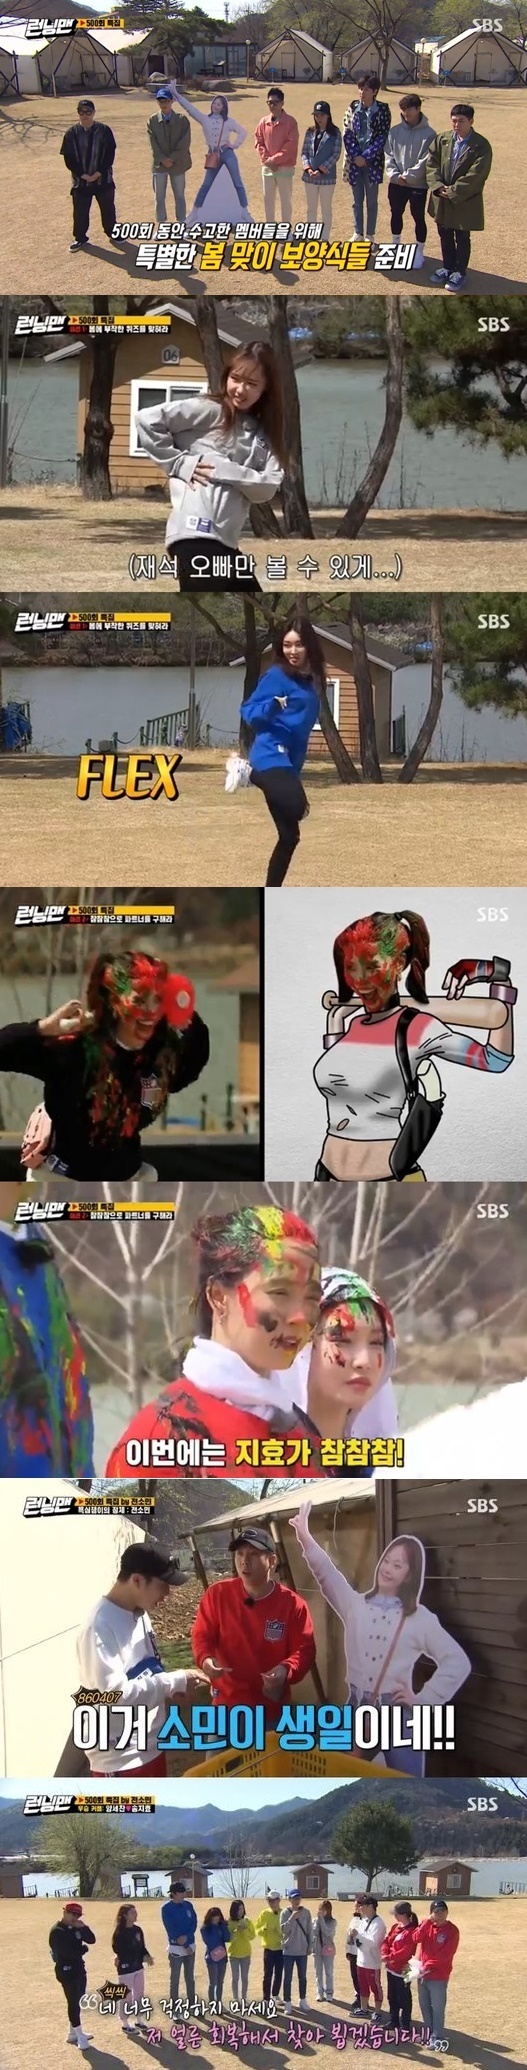 SBS Running Man, which was held 500 times, took first place in entertainment TV viewer ratings in the same time zone.According to Nielsen Korea, a TV viewer rating research company, Running Man, which was broadcast on April 26, recorded 5.5% of the average TV viewer ratings and 7.9% of the second part (based on Seoul Capital Area furniture TV viewer ratings), and all of the same time entertainment such as Dog ear for boss and together I did.The 2049 target TV viewer ratings, which are important indicators of major advertising officials, rose to 3.8% (based on Seoul Capital Area household TV viewer ratings, Part 2), and the highest TV viewer ratings per minute was 9.7%.The show was decorated with the 500th special Race Do You Eat Rice Race, and Apink lanterns, Bomi, Cheongha, Lovelyz Americas, and Wikimikki Yujeong joined as guests.Running Man, which was prepared as a quiet self-congratulatory race in consideration of the recent social atmosphere, was unveiled at the 500th time by Apink and Cheonghas new song stage, and Running Man, which raised the atmosphere, drew a big smile from its first mission, Dancing Catalena, to extraordinary misrepresentations.In the second mission, Im Going to Save Now, the members poured 500 times of makeup gags, turning over paints according to the speed of the game.The Americas became a techno warrior through the Game of the True Game, and Lee Kwang-soo turned into a water-color monster by replaying colostrum.On the other hand, the members had to find out the Identity of  greedy who wanted to monopolize all products in Race, and eventually Yang Se-chan reasoned Jeon So-min, who was taking a break as a greedy man.Song Ji-hyo won the couples title at Fawn with Yang Se-chan, which was the best one minute with 9.7% of the best TV viewer ratings per minute.bak-beauty